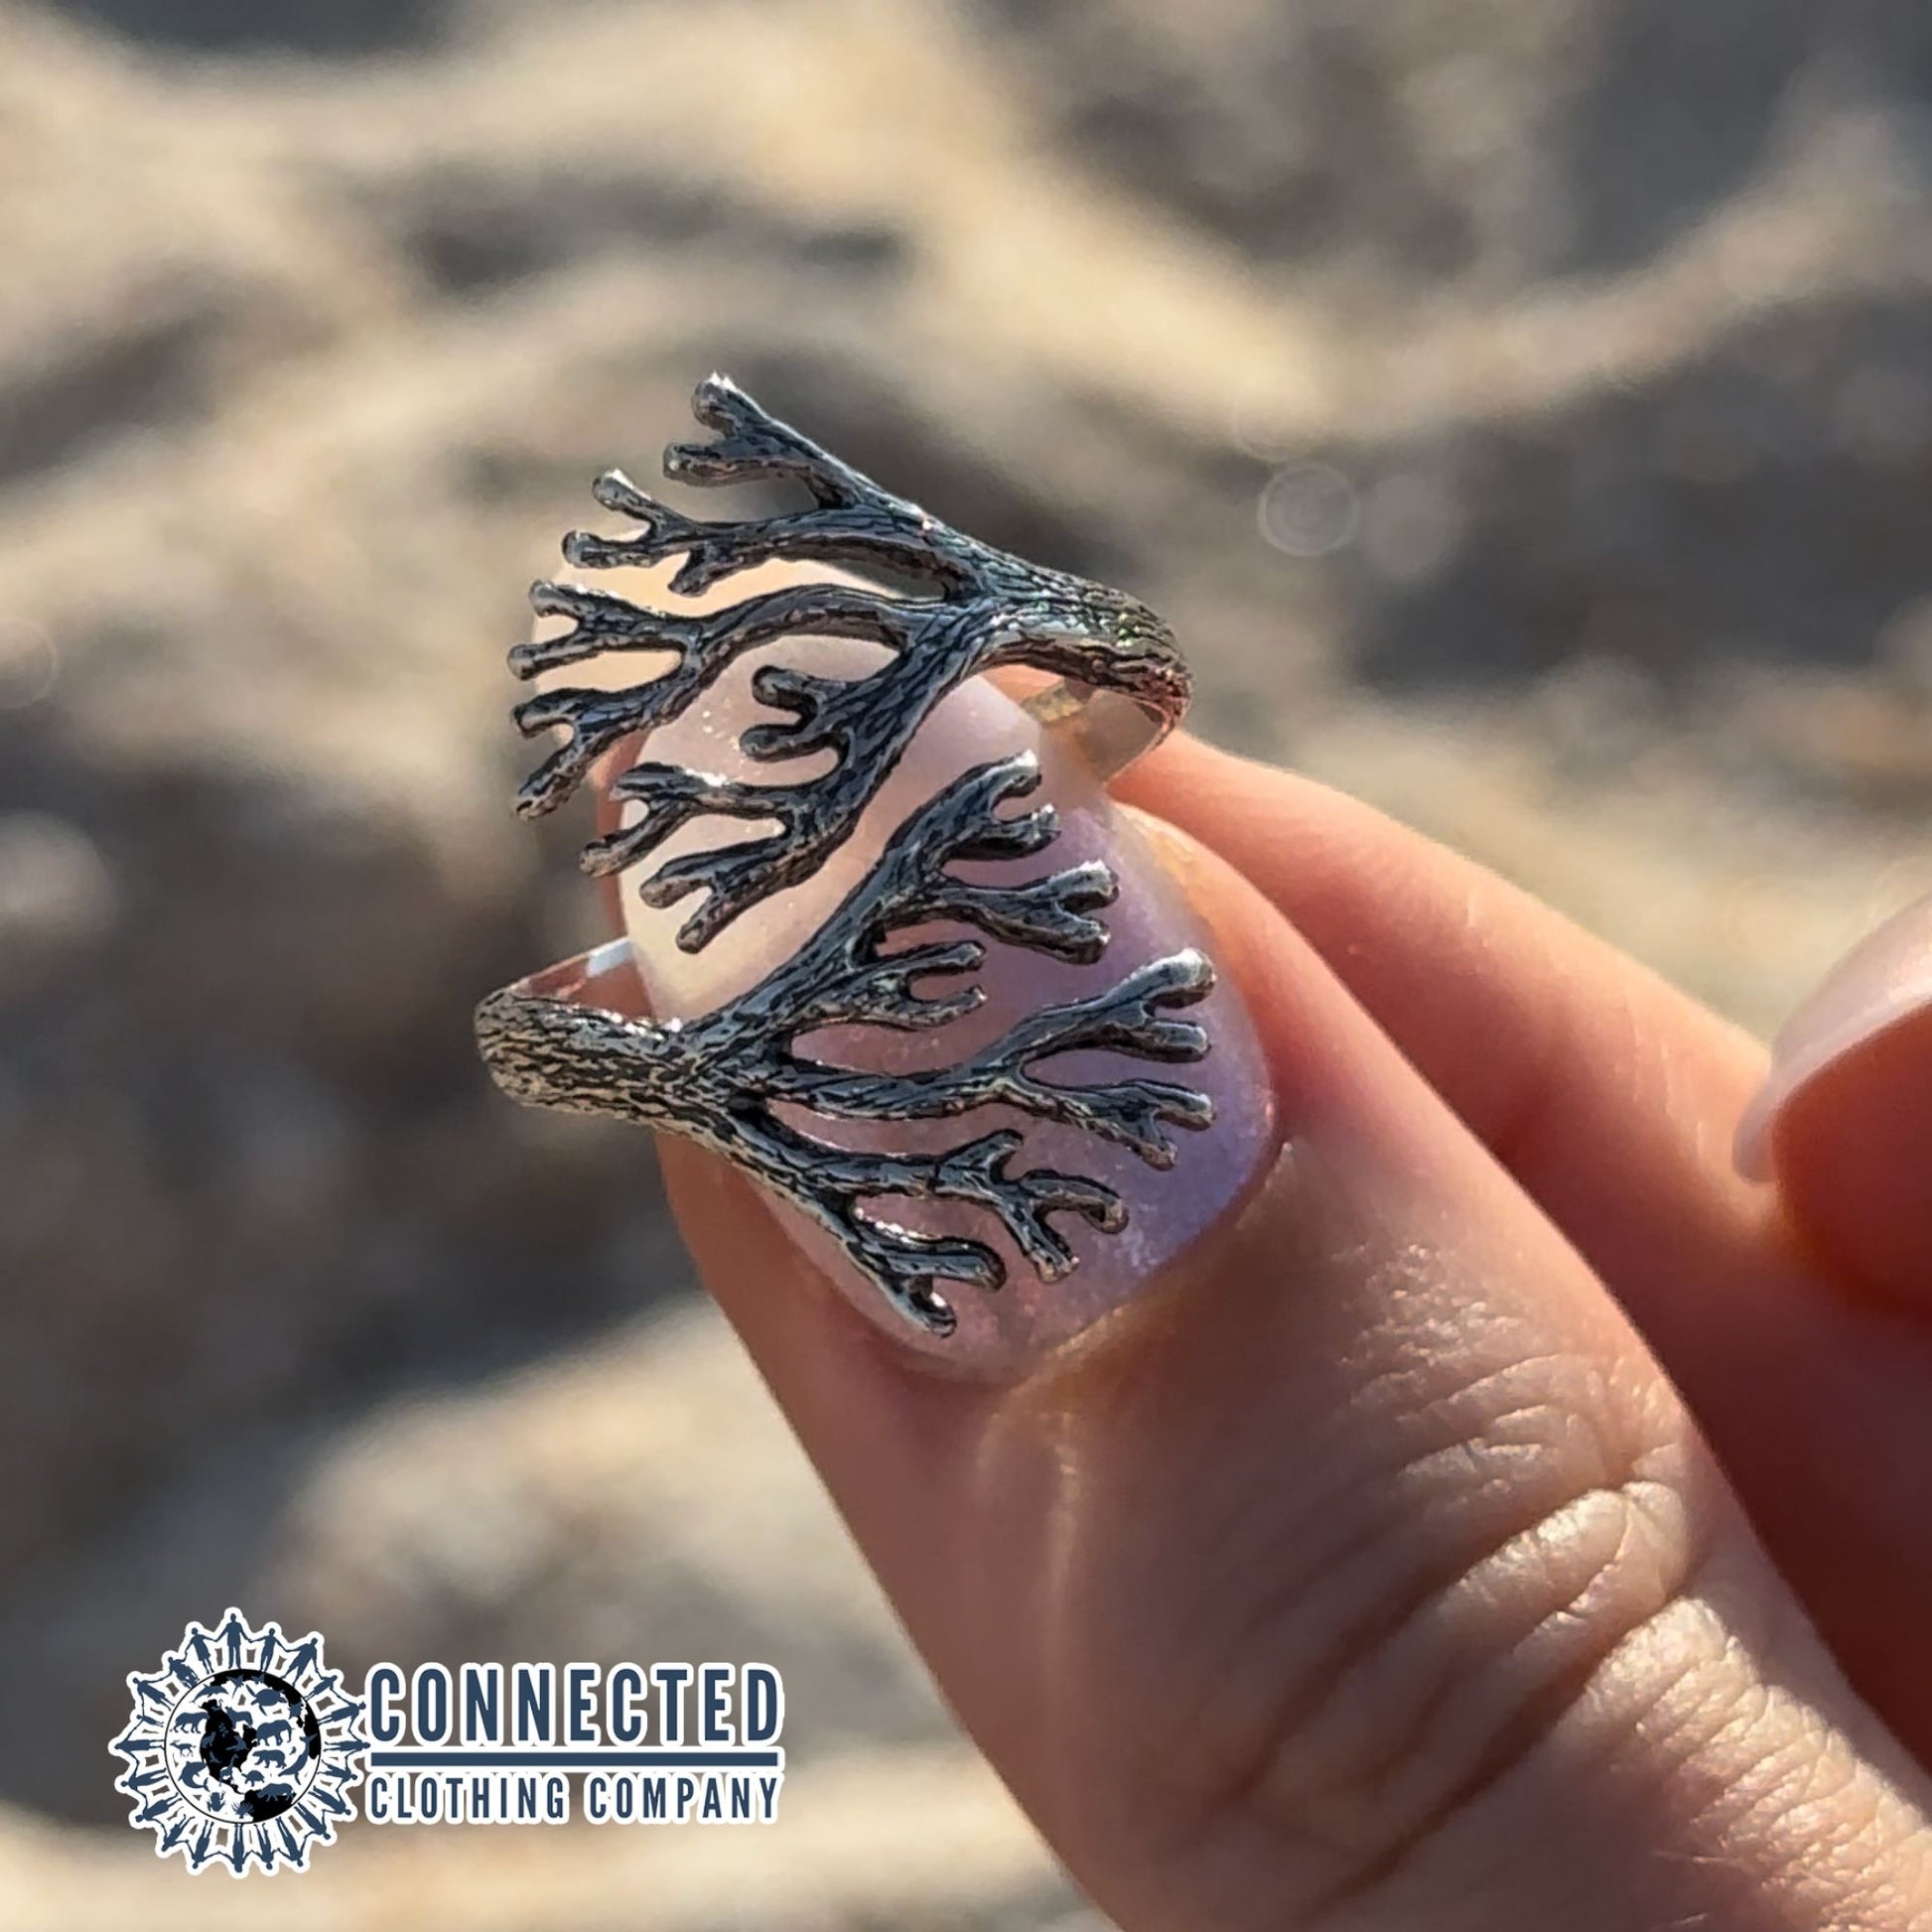 Sea Coral Adjustable Ring - Connected Clothing Company - 10% donated to ocean conservation